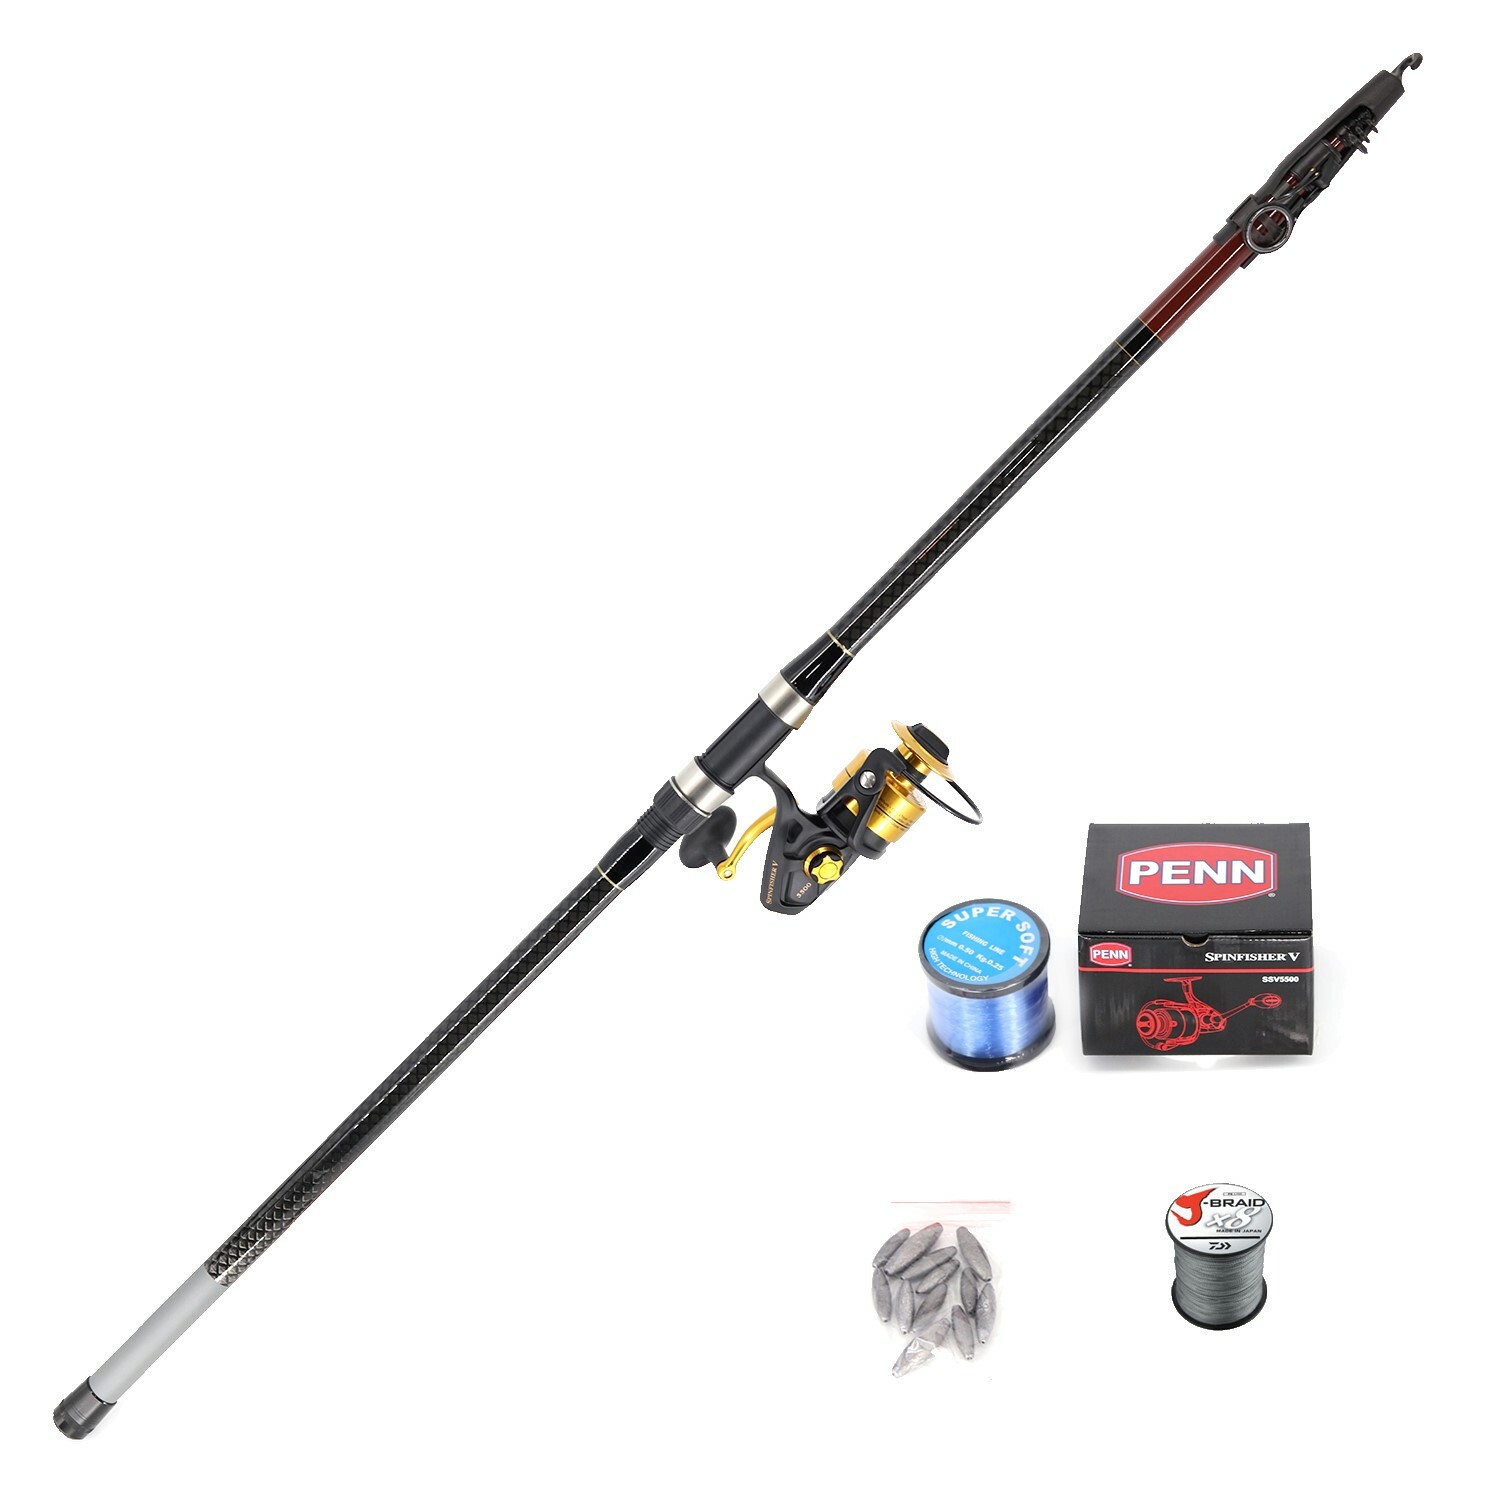 Shore Fishing (Pilot 4.5m and Penn V5500 including braid and mono line with rigs and sinkers) Combo